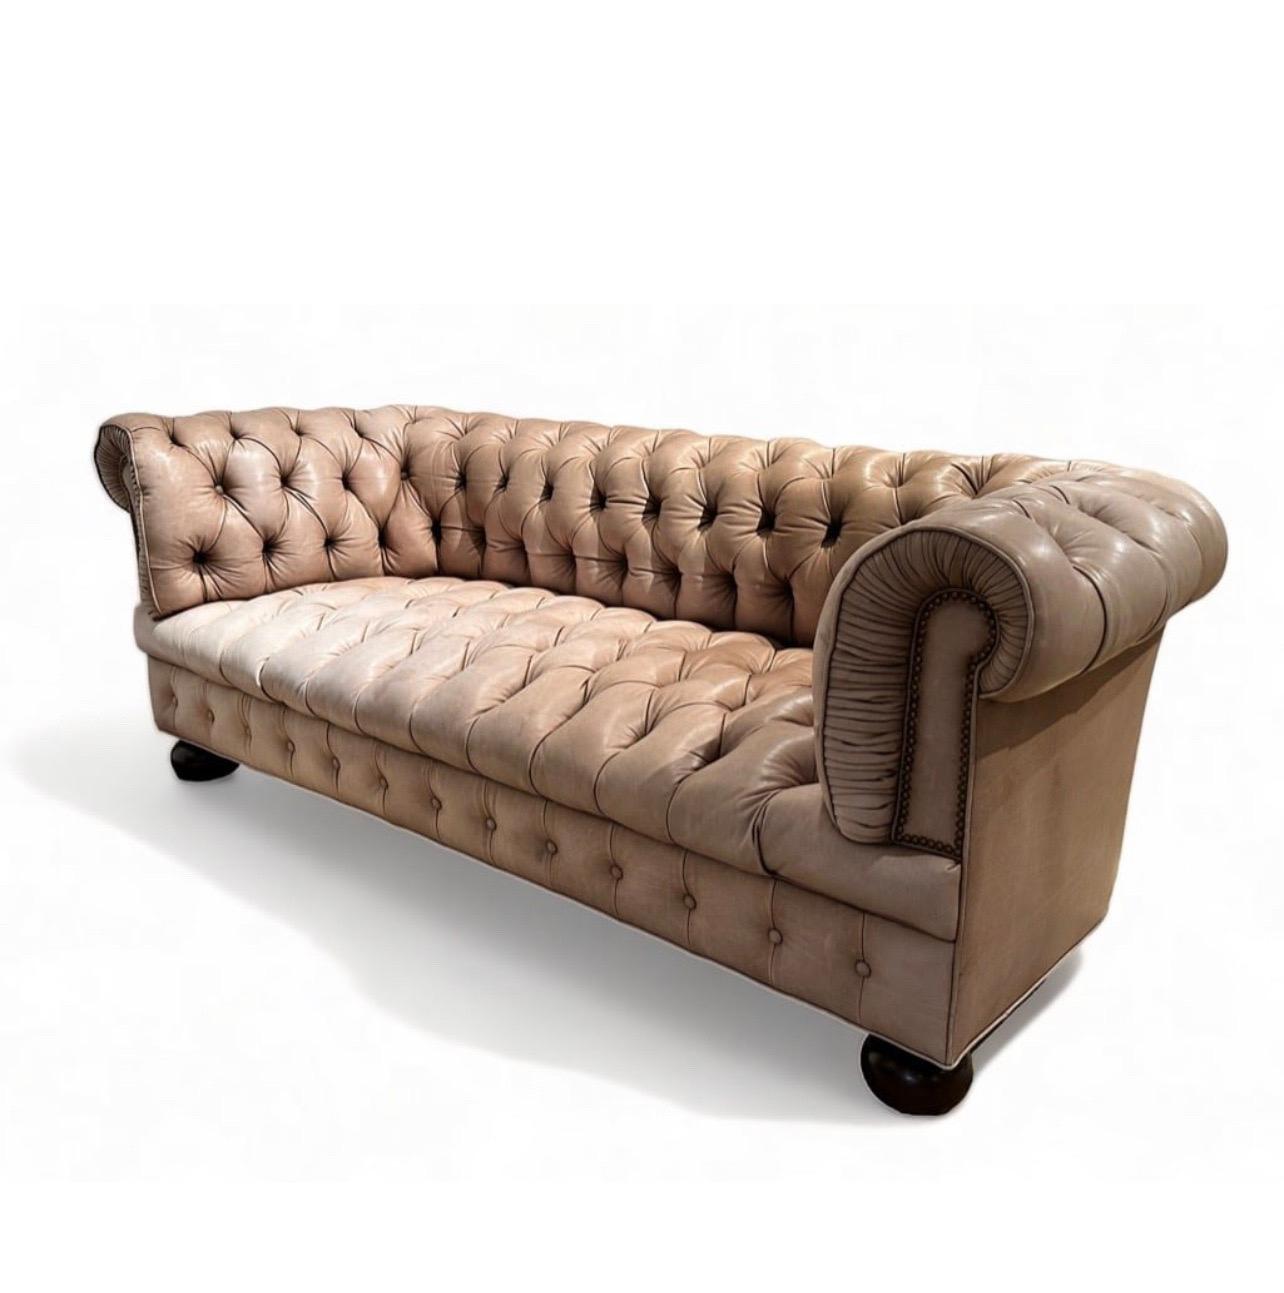 Beautiful Vintage Chesterfield Sofa from Stark, London
Rolled arms with tufted back and seat and raised on bun feet. Some subtle uneven sun fading adds an authentic vintage chesterfield charm to this beauty. Unmarked. Taupe Leather is butter soft